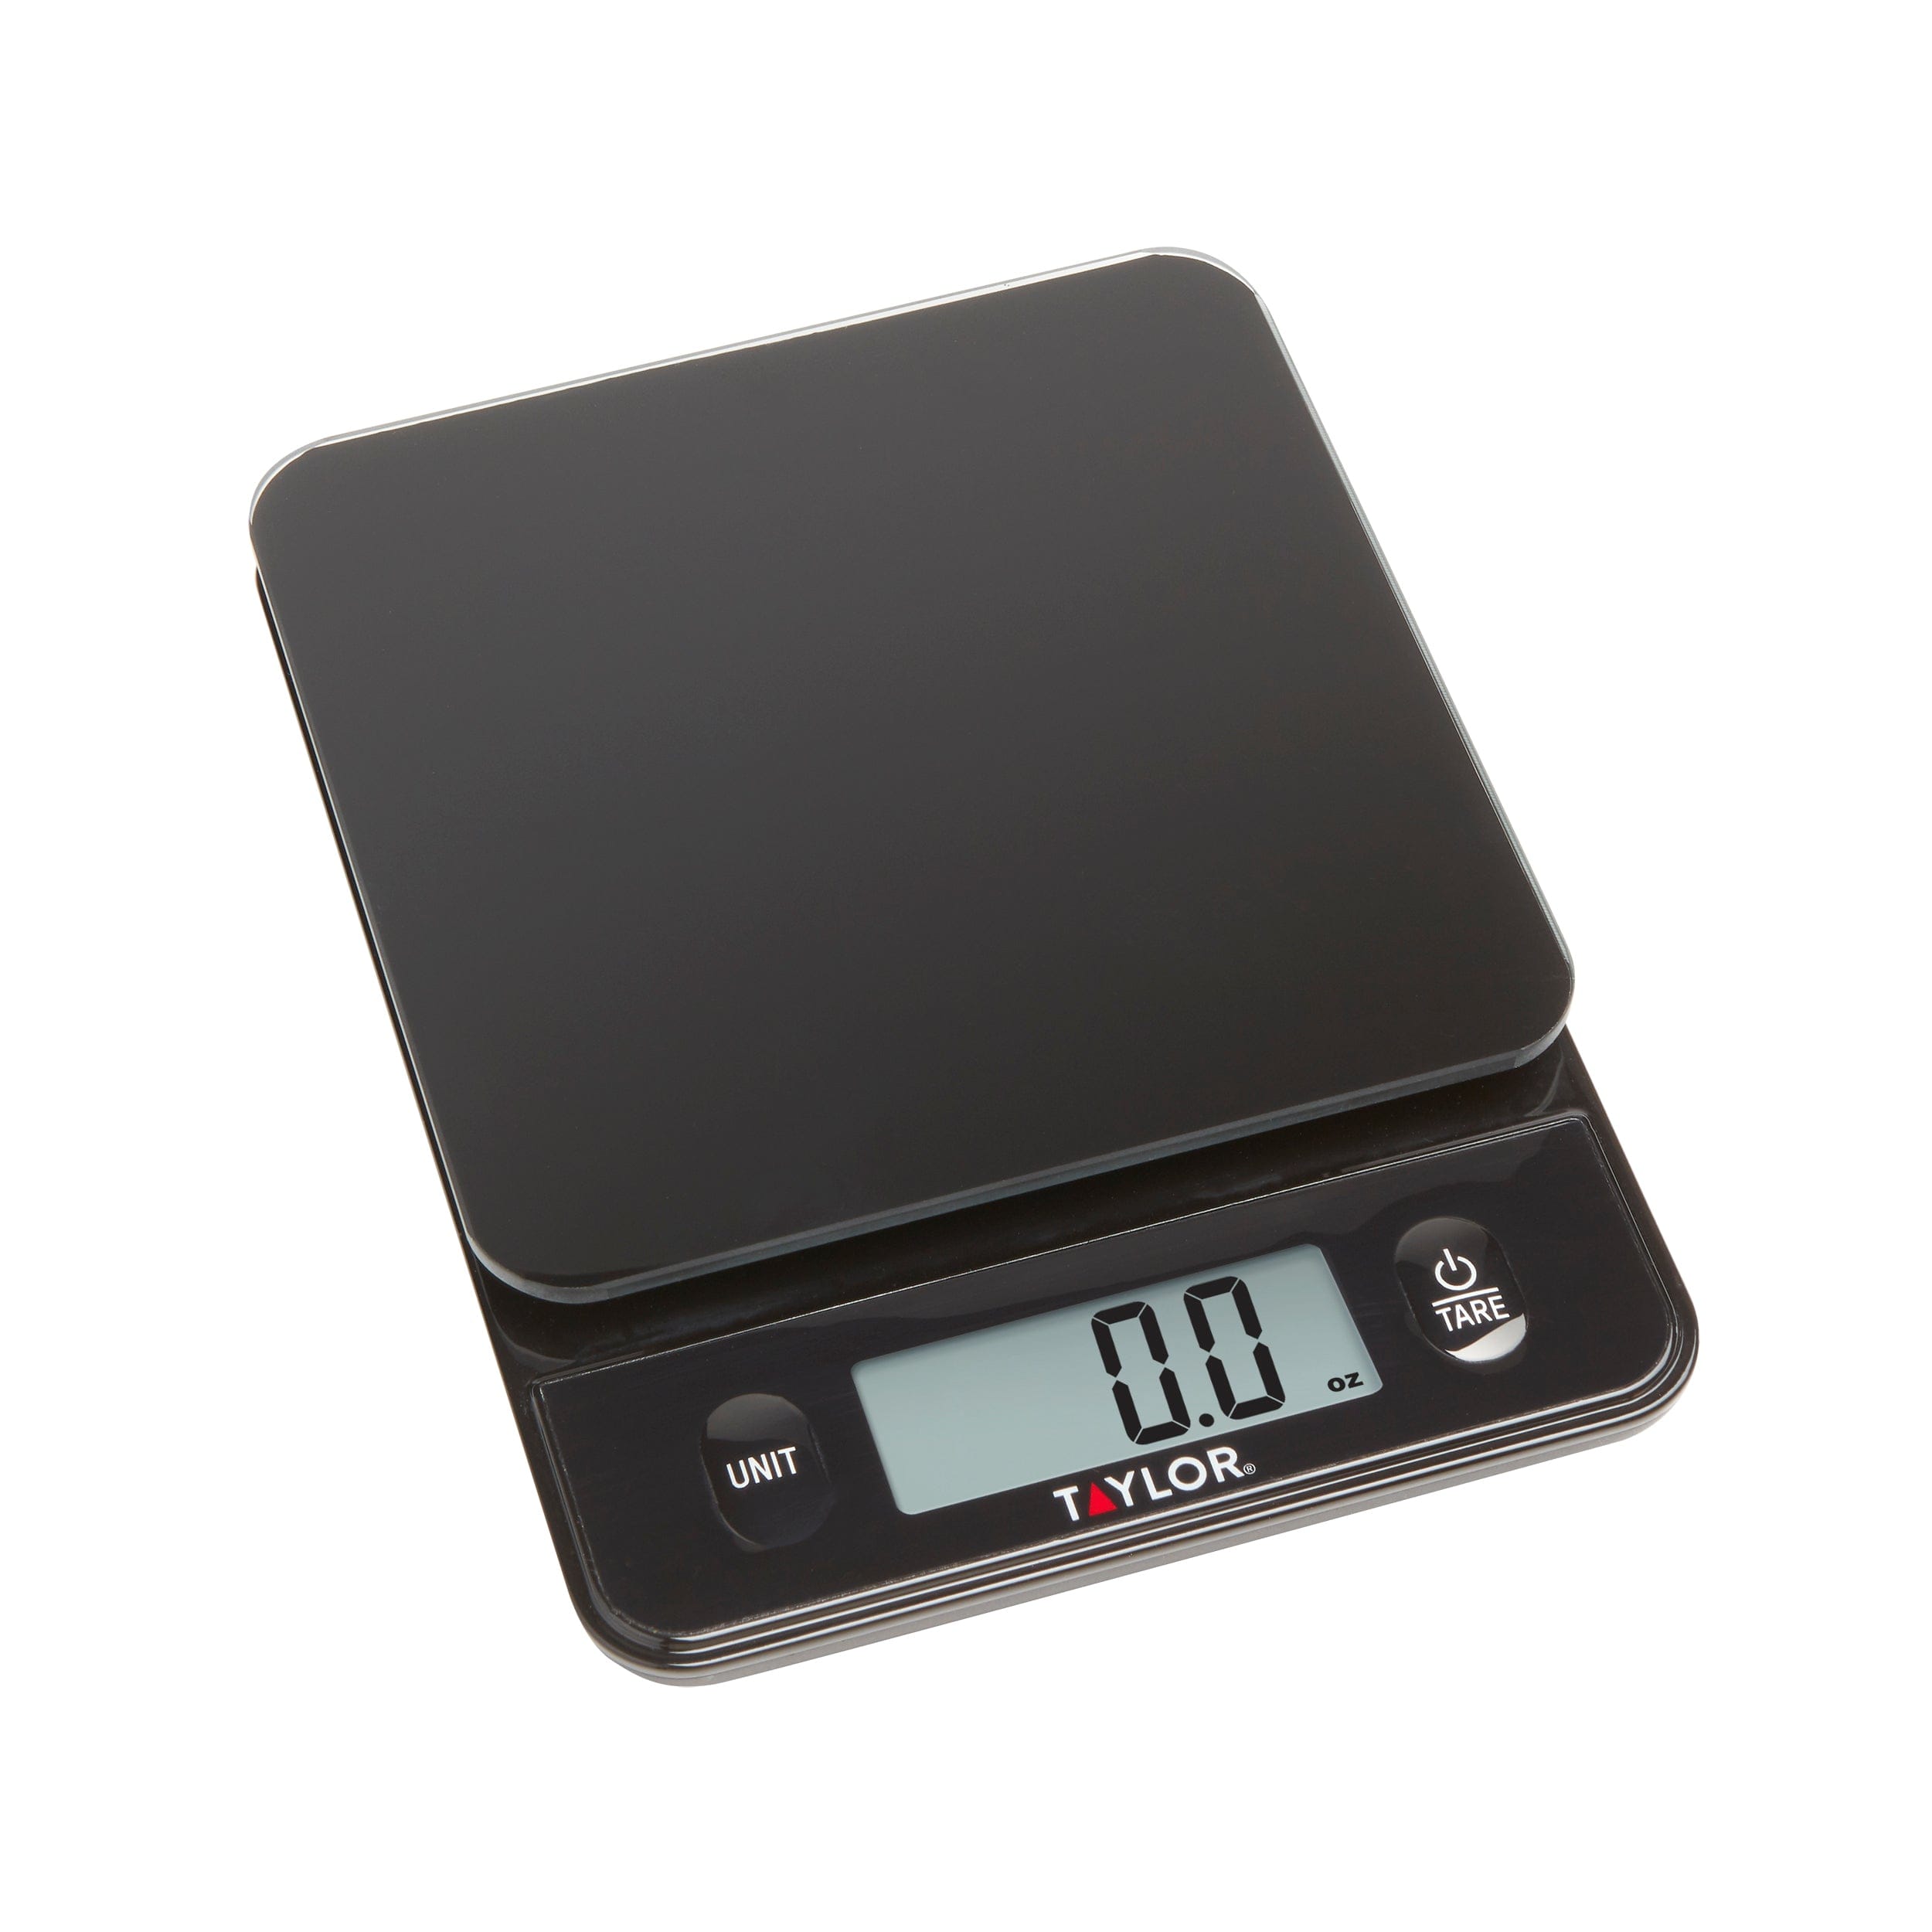 Taylor® 3851 - Glass Black Digital Kitchen Scale (Up to 33 lbs